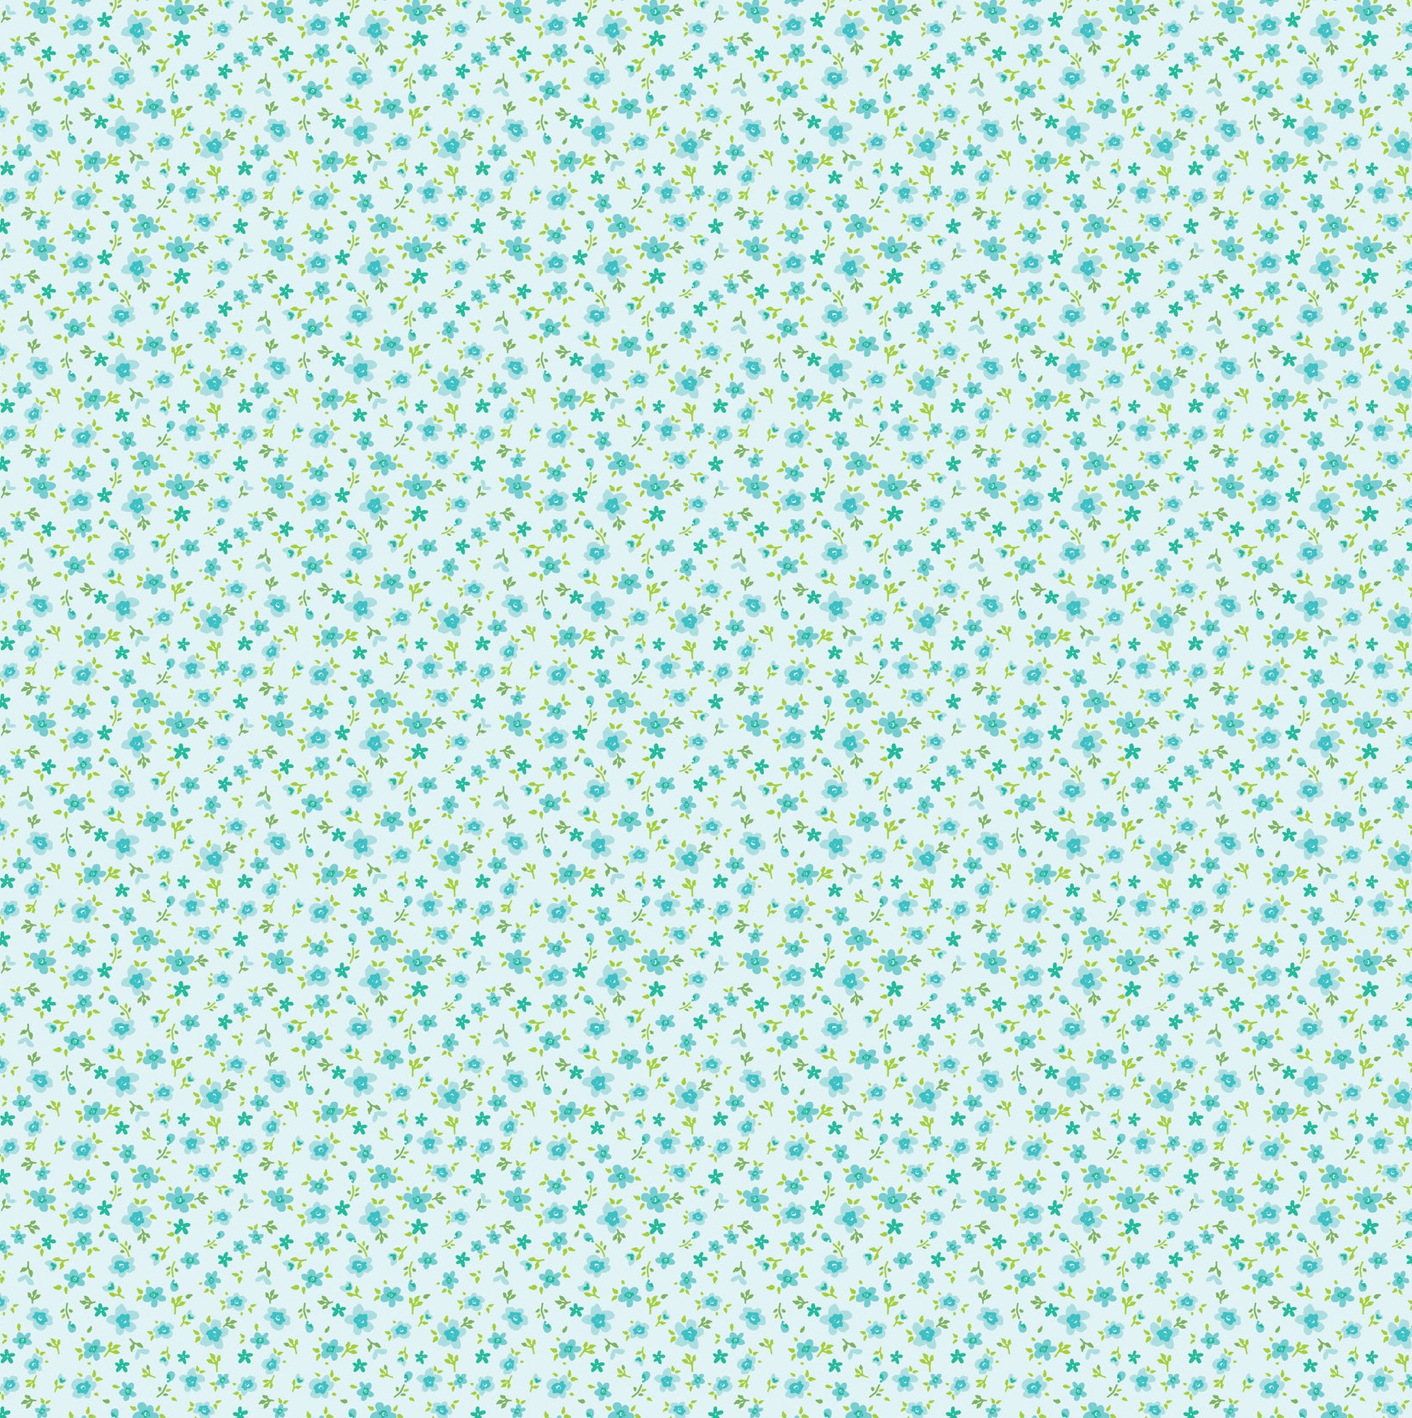 Market Day Tiny Flowers Teal MK24570, sold by the 1/2 yard, *PRE-ORDER